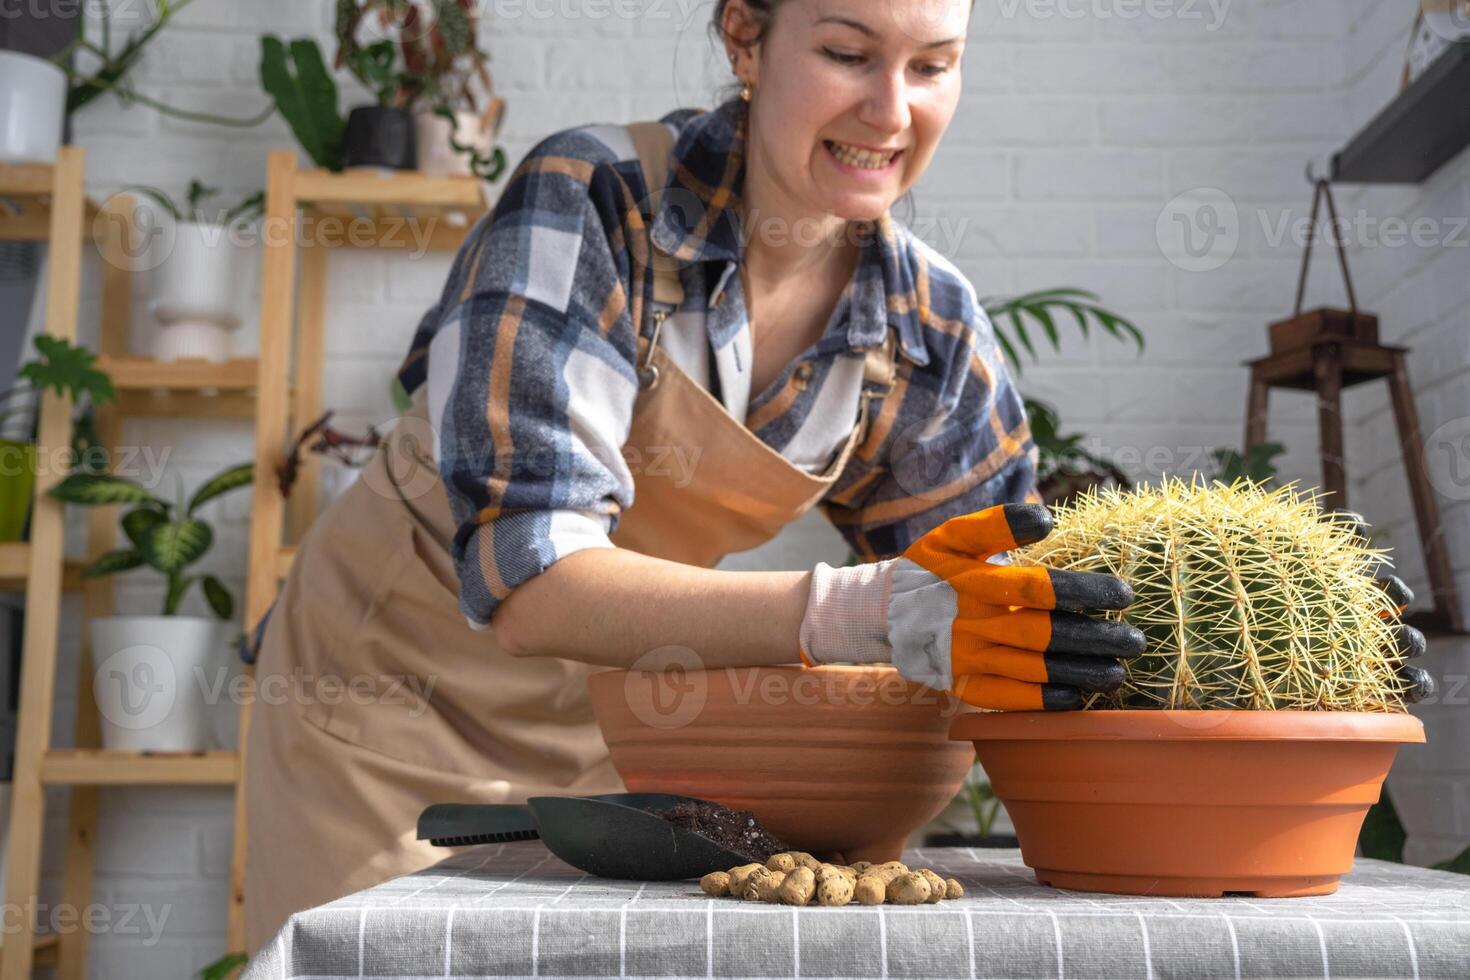 Repotting overgrown home plant large spiny cactus Echinocactus Gruzoni into new bigger pot. A woman in protective gloves holds the cactus carefully, afraid of getting pricked photo